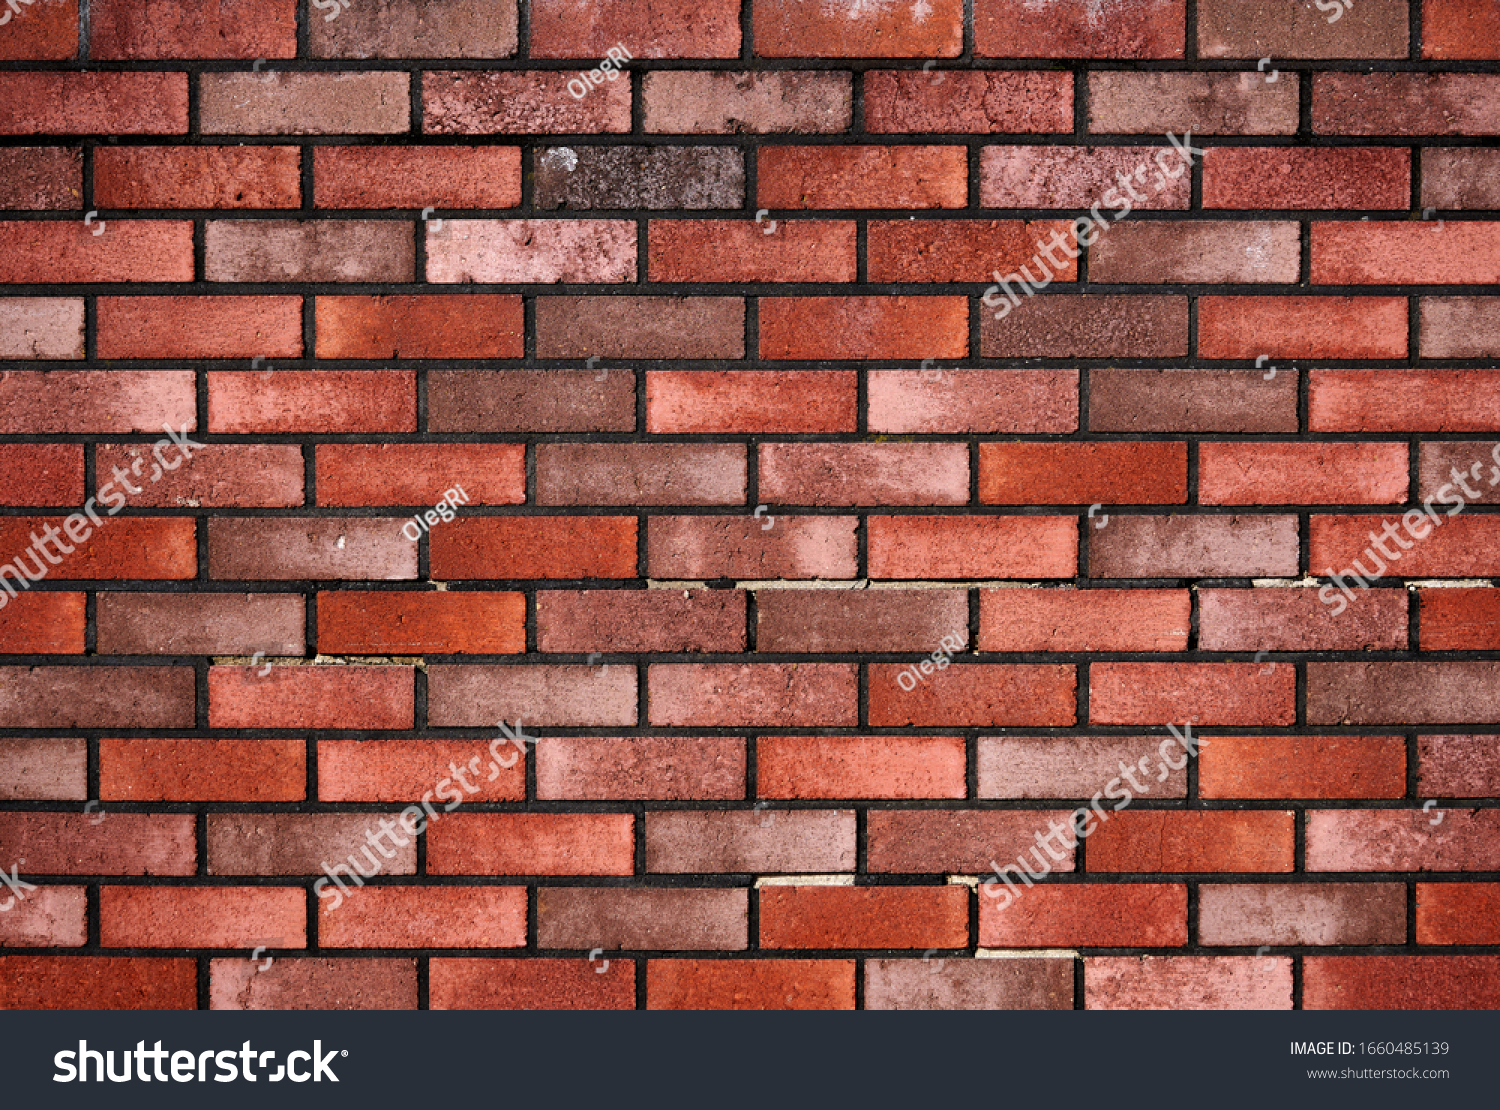 Brick wall with red brick, red brick background. #1660485139